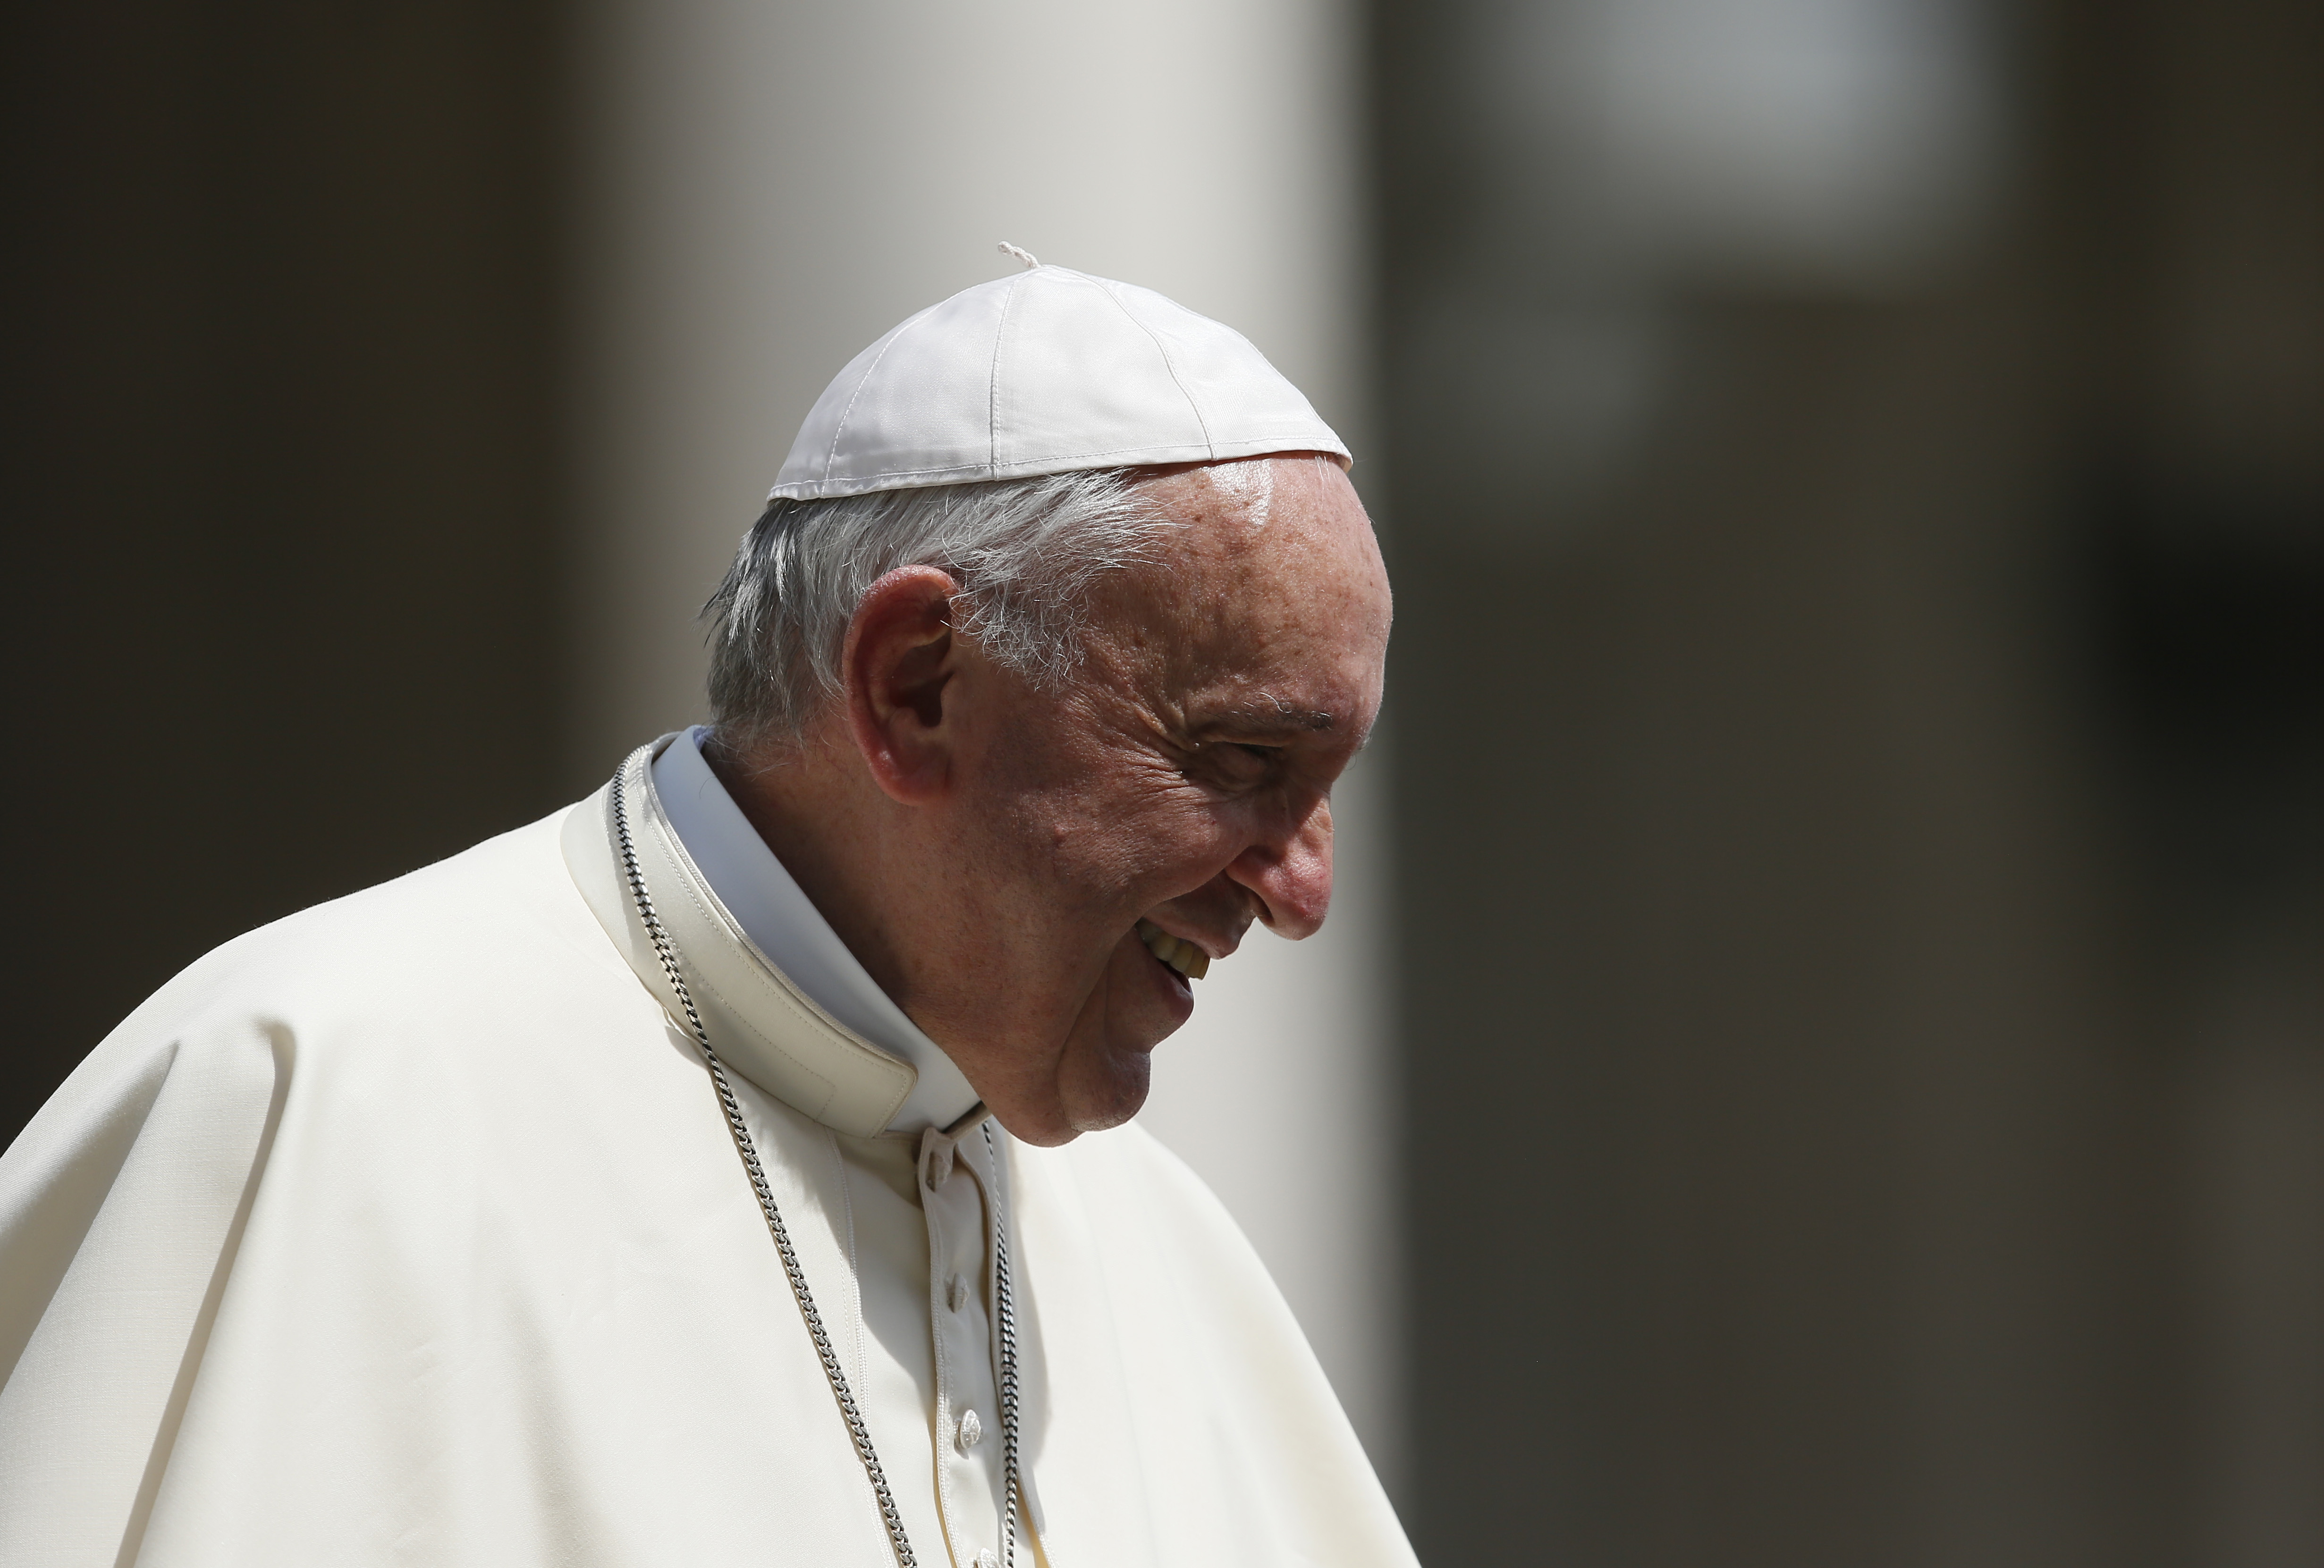 Pope: Small acts of kindness, not great speeches, show God's love best